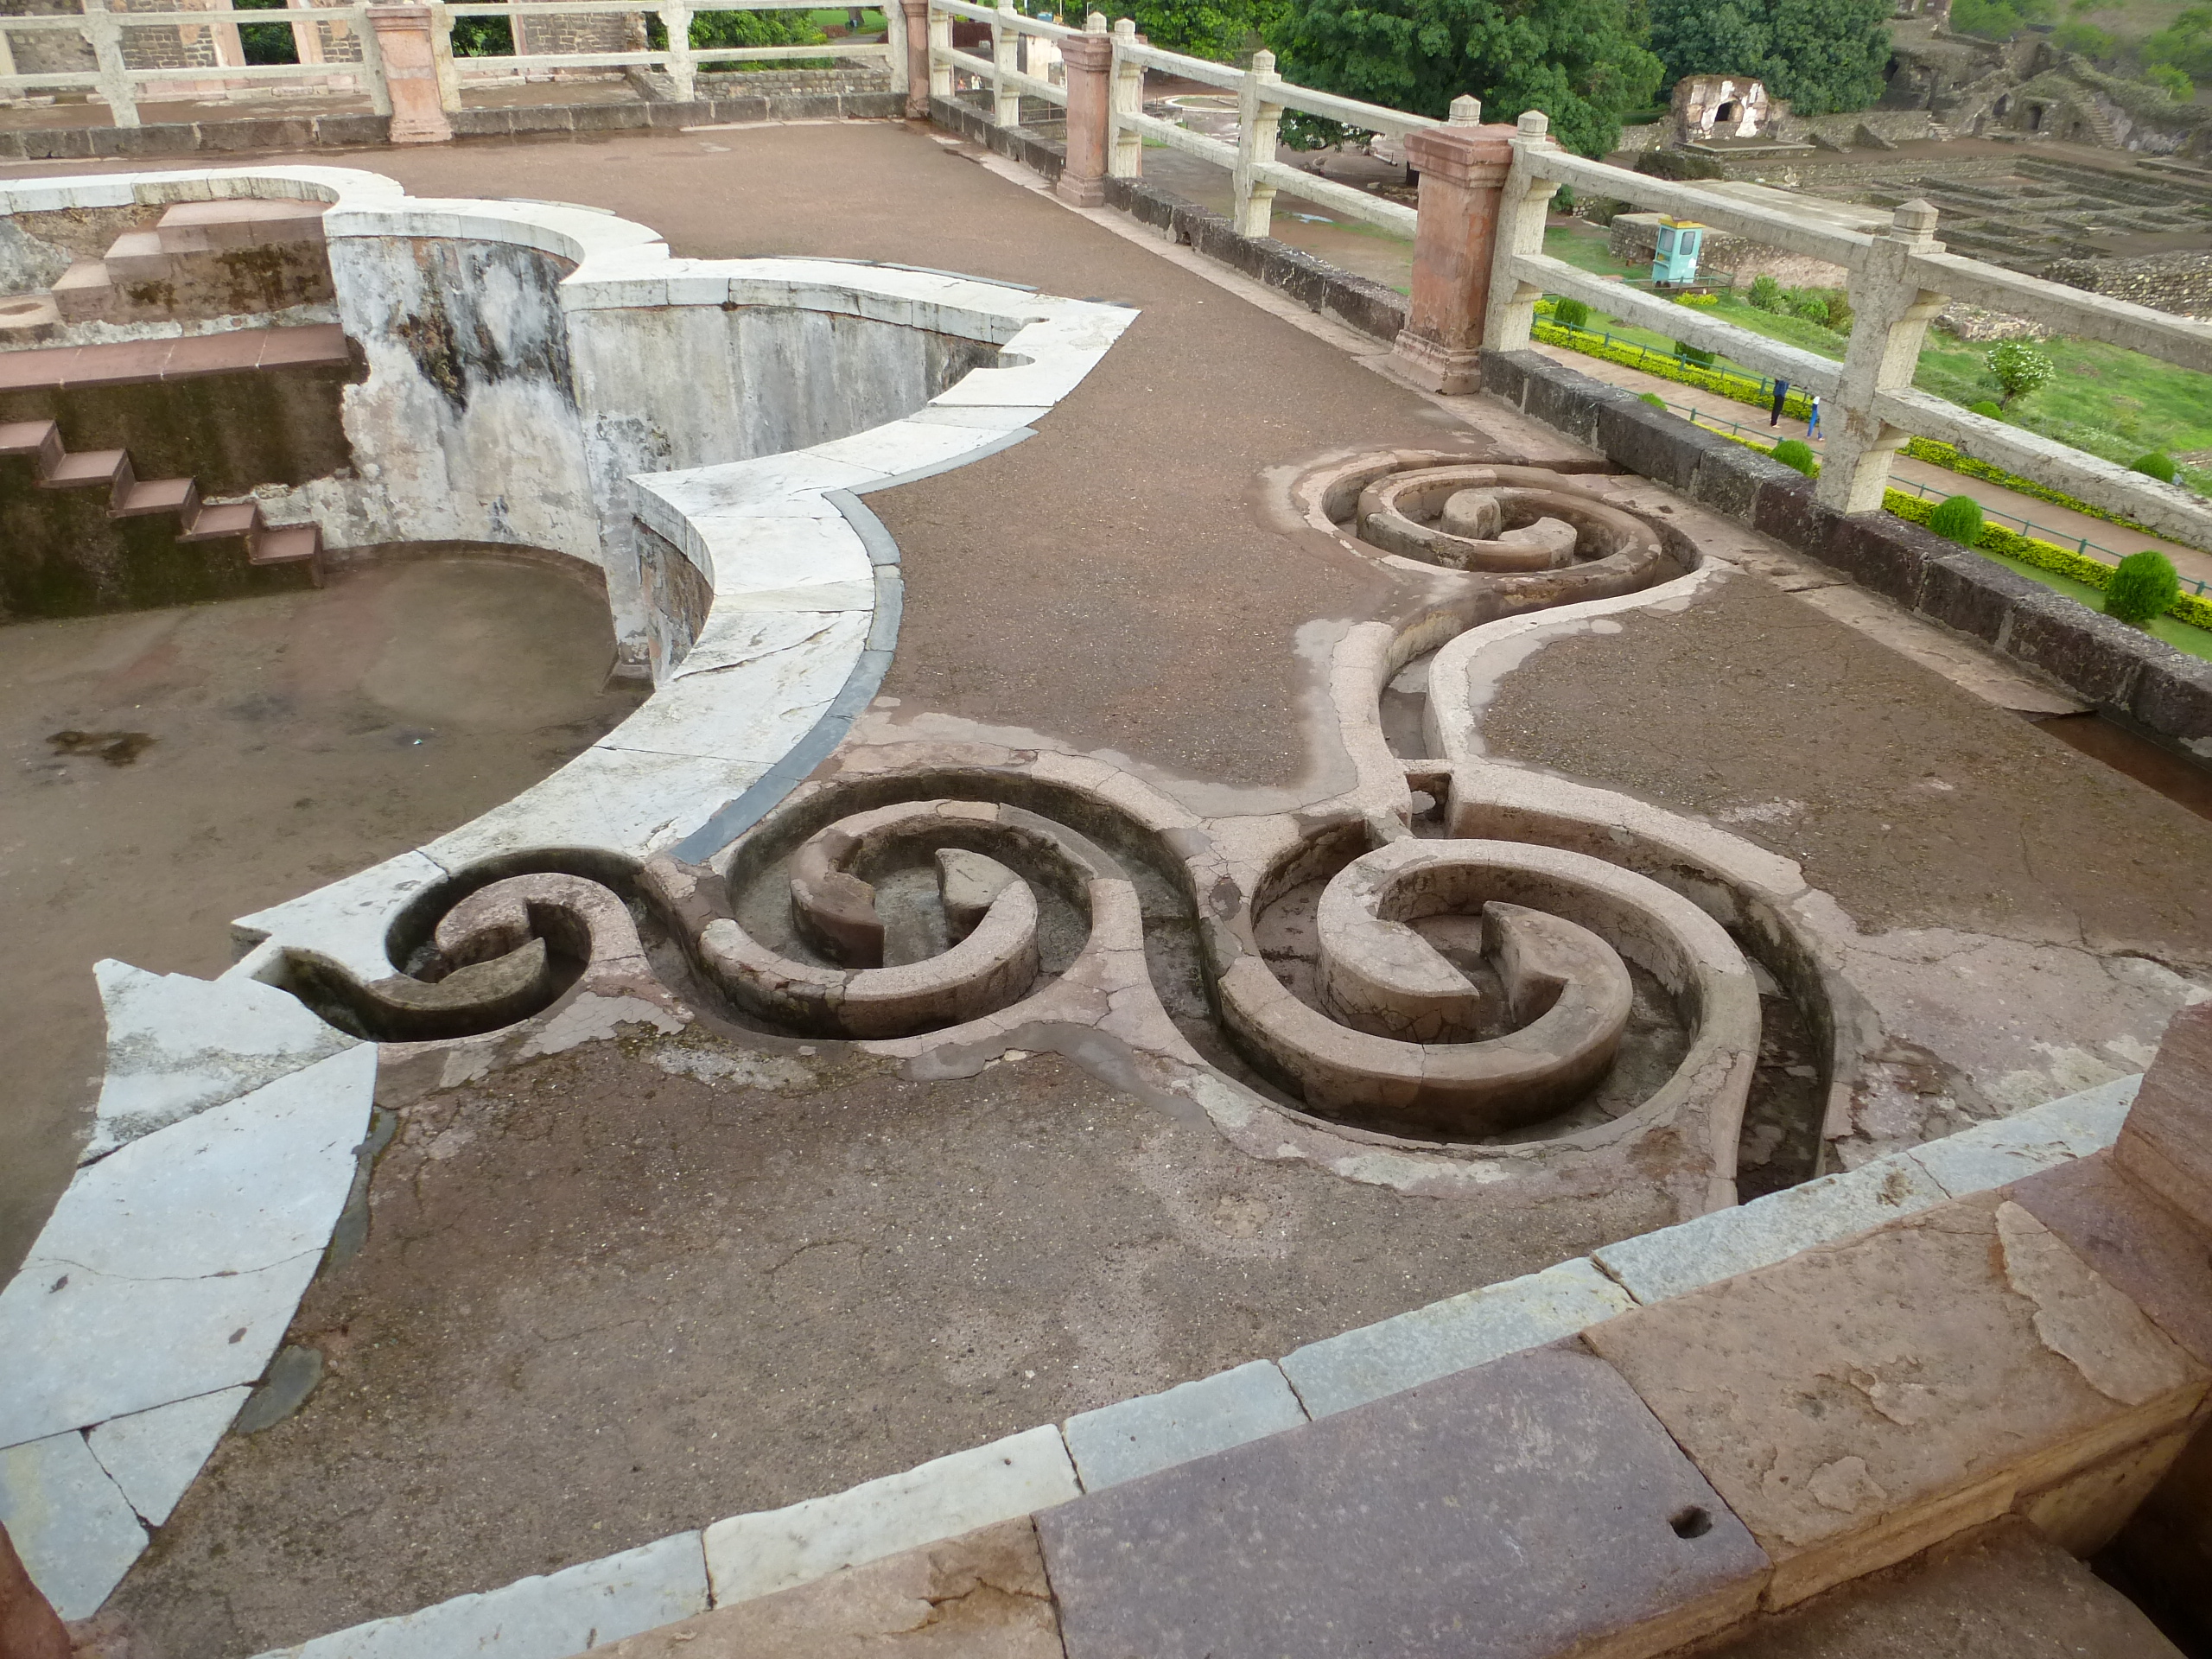 Kamal (or Lotus) pond showing its sinuous feeder channel